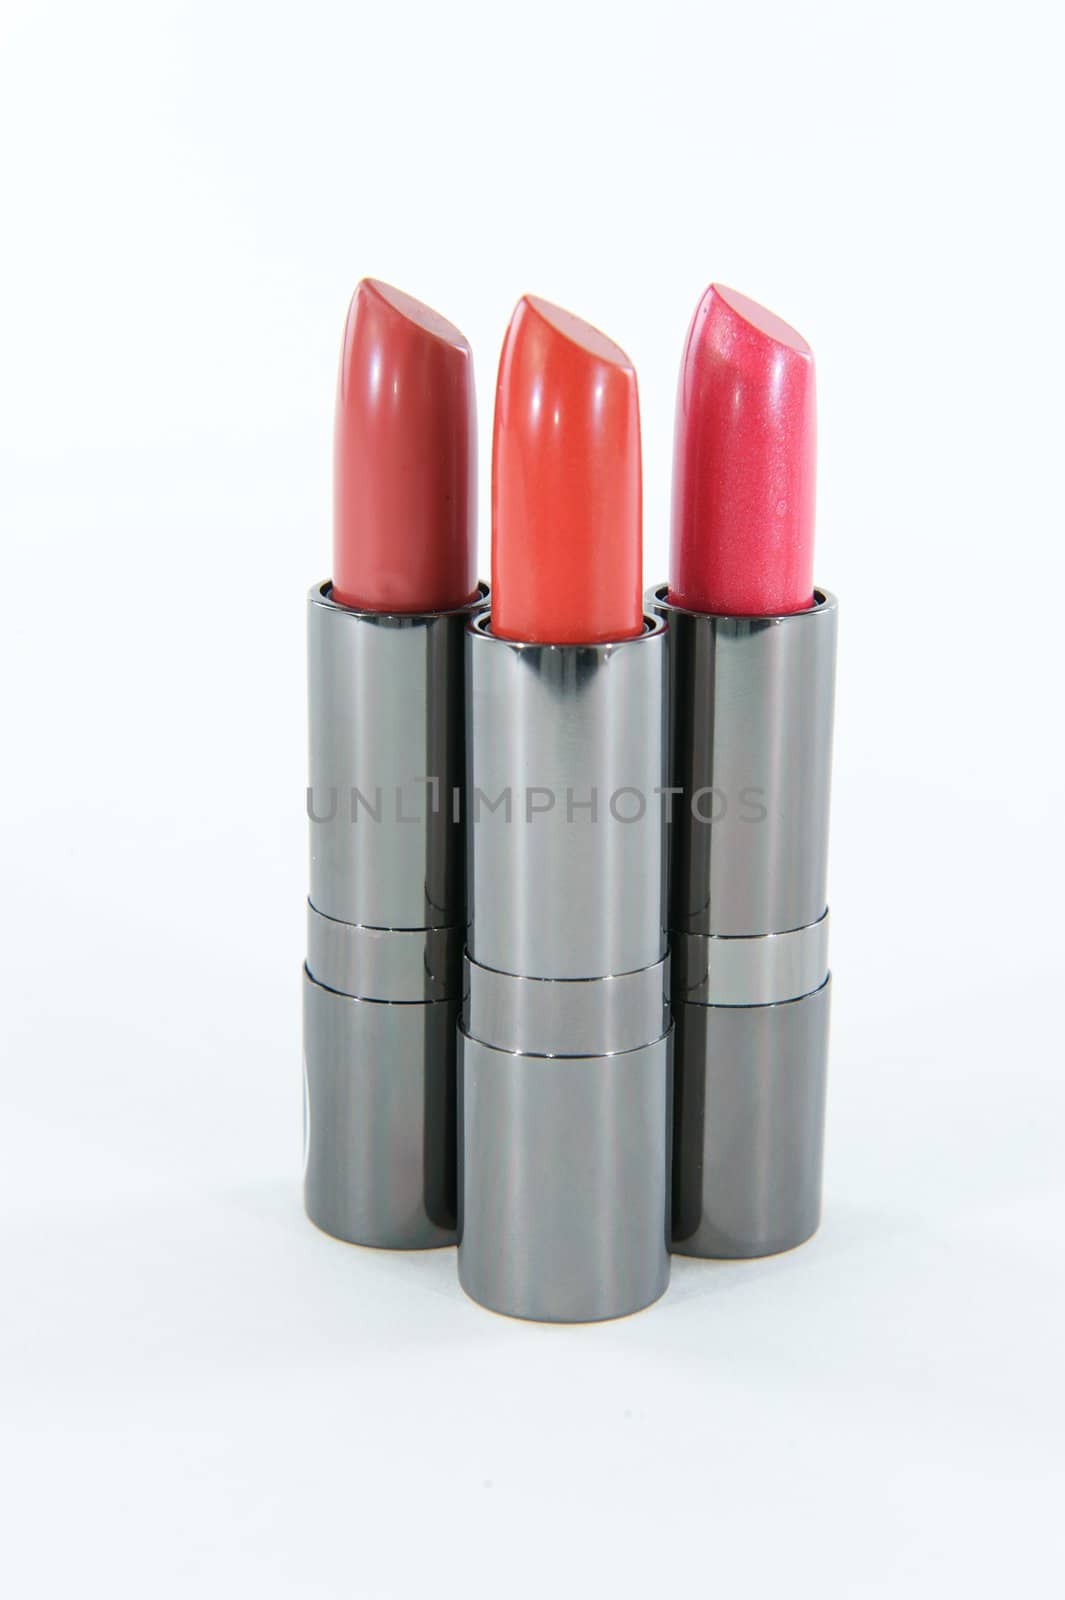 Cluster of Three Lipstick Cases Standing against a White Background by pixelsnap